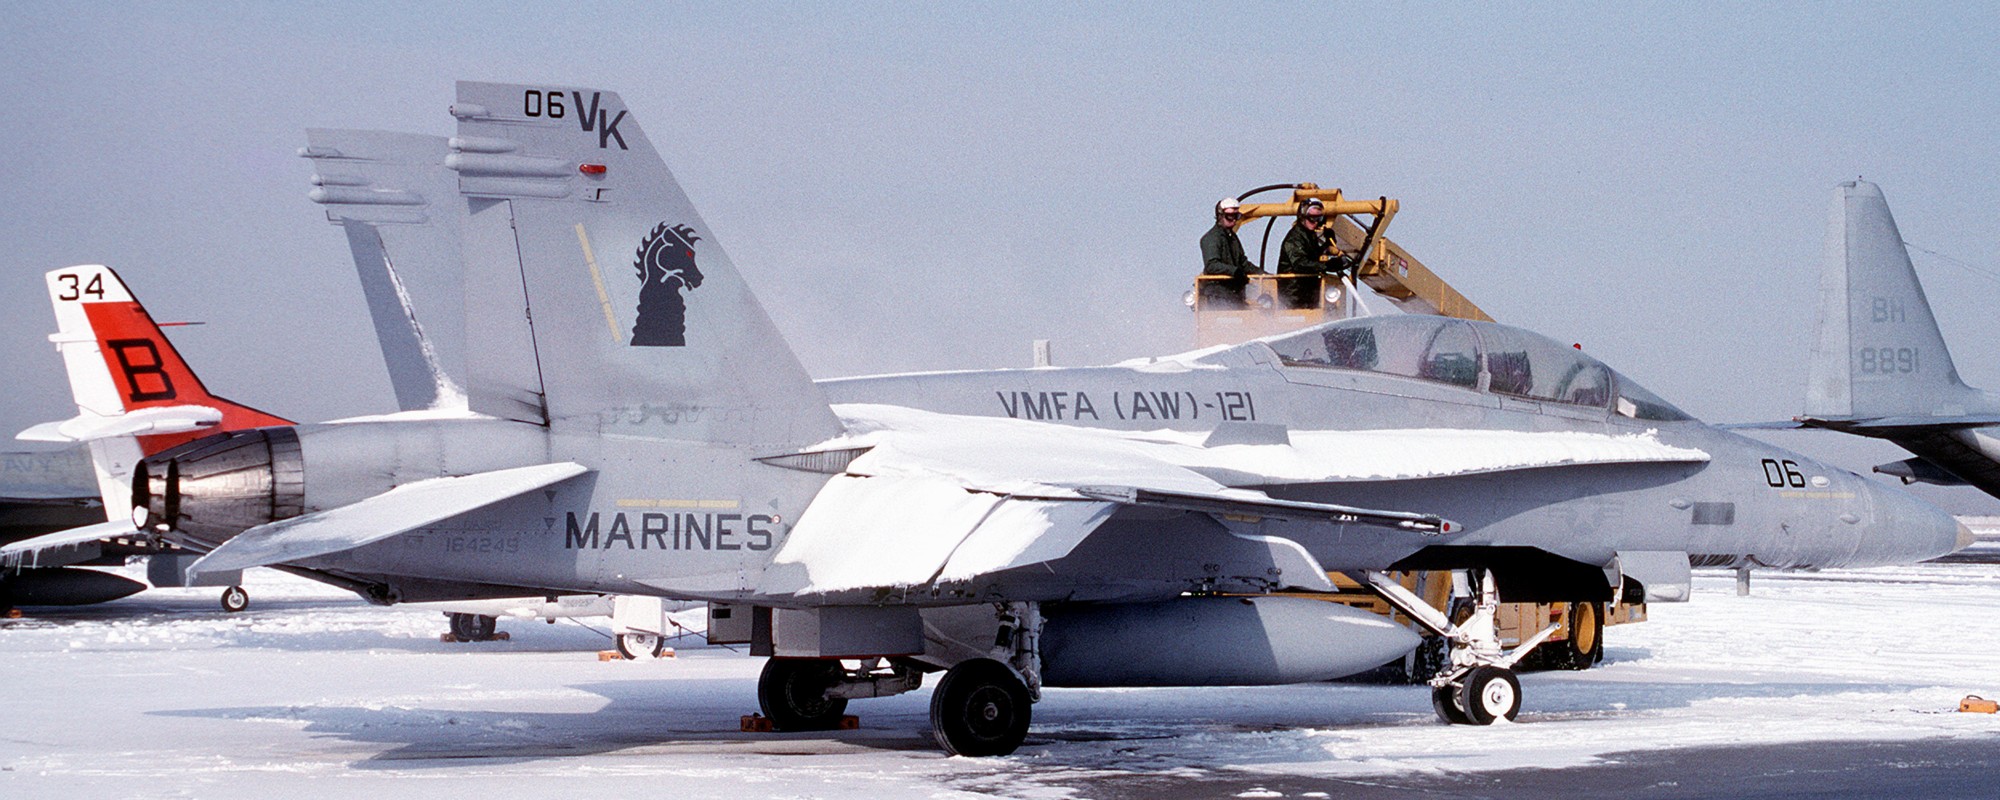 vmfa(aw)-121 green knights marine fighter attack squadron f/a-18d hornet 16